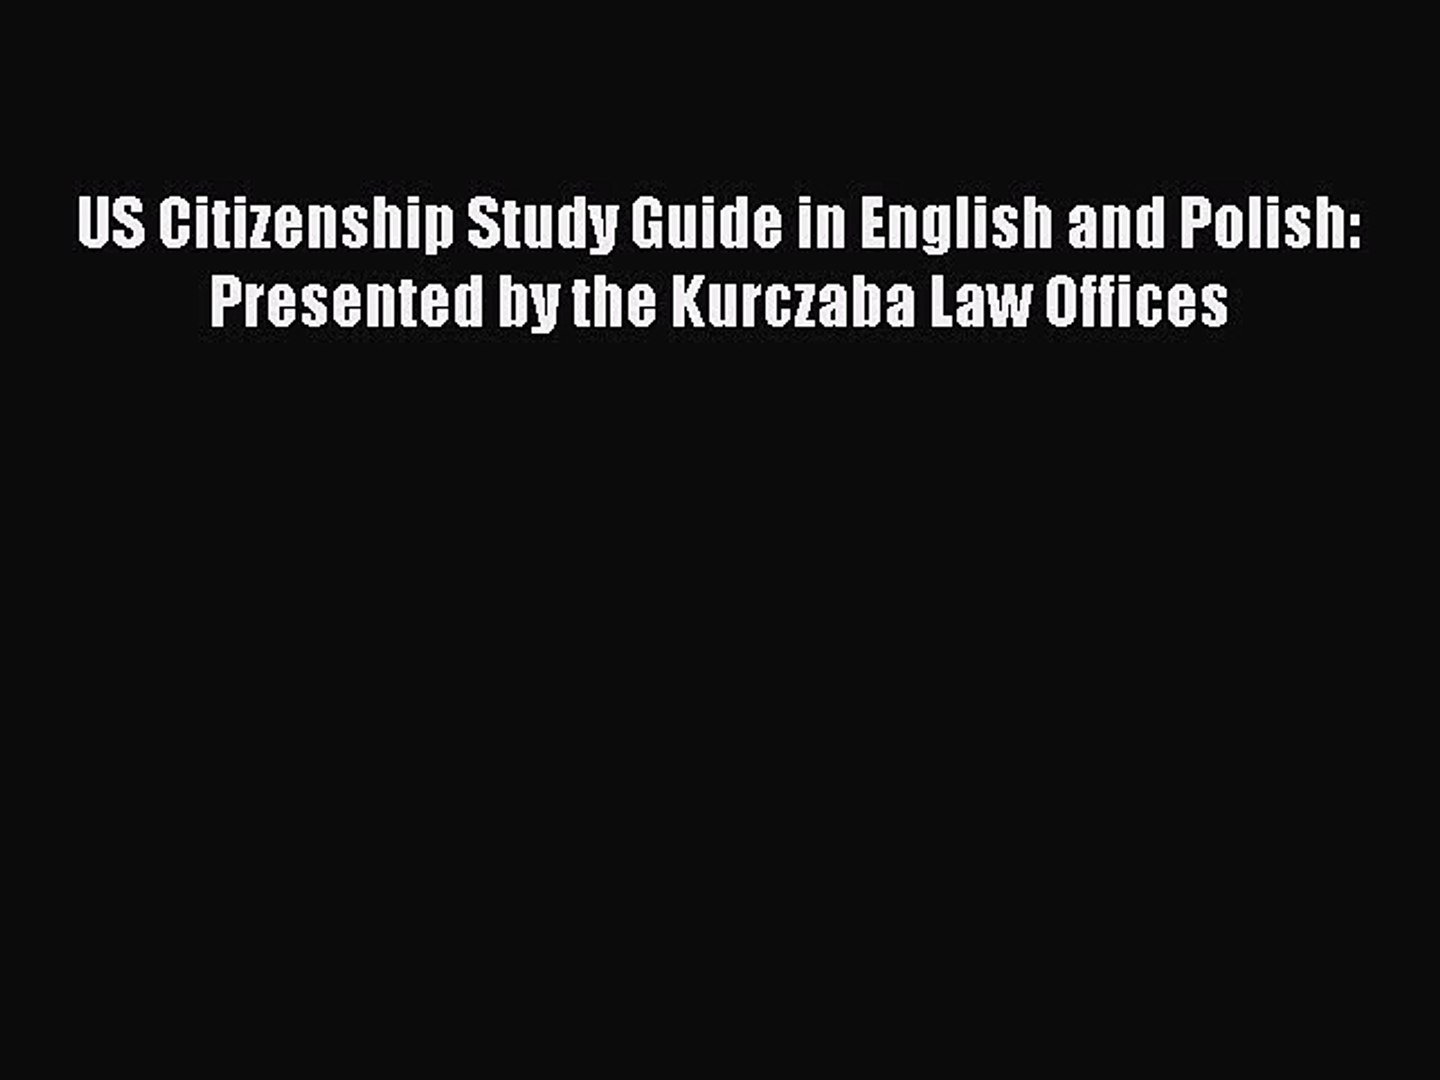 Download US Citizenship Study Guide in English and Polish: Presented by the Kurczaba Law Offices